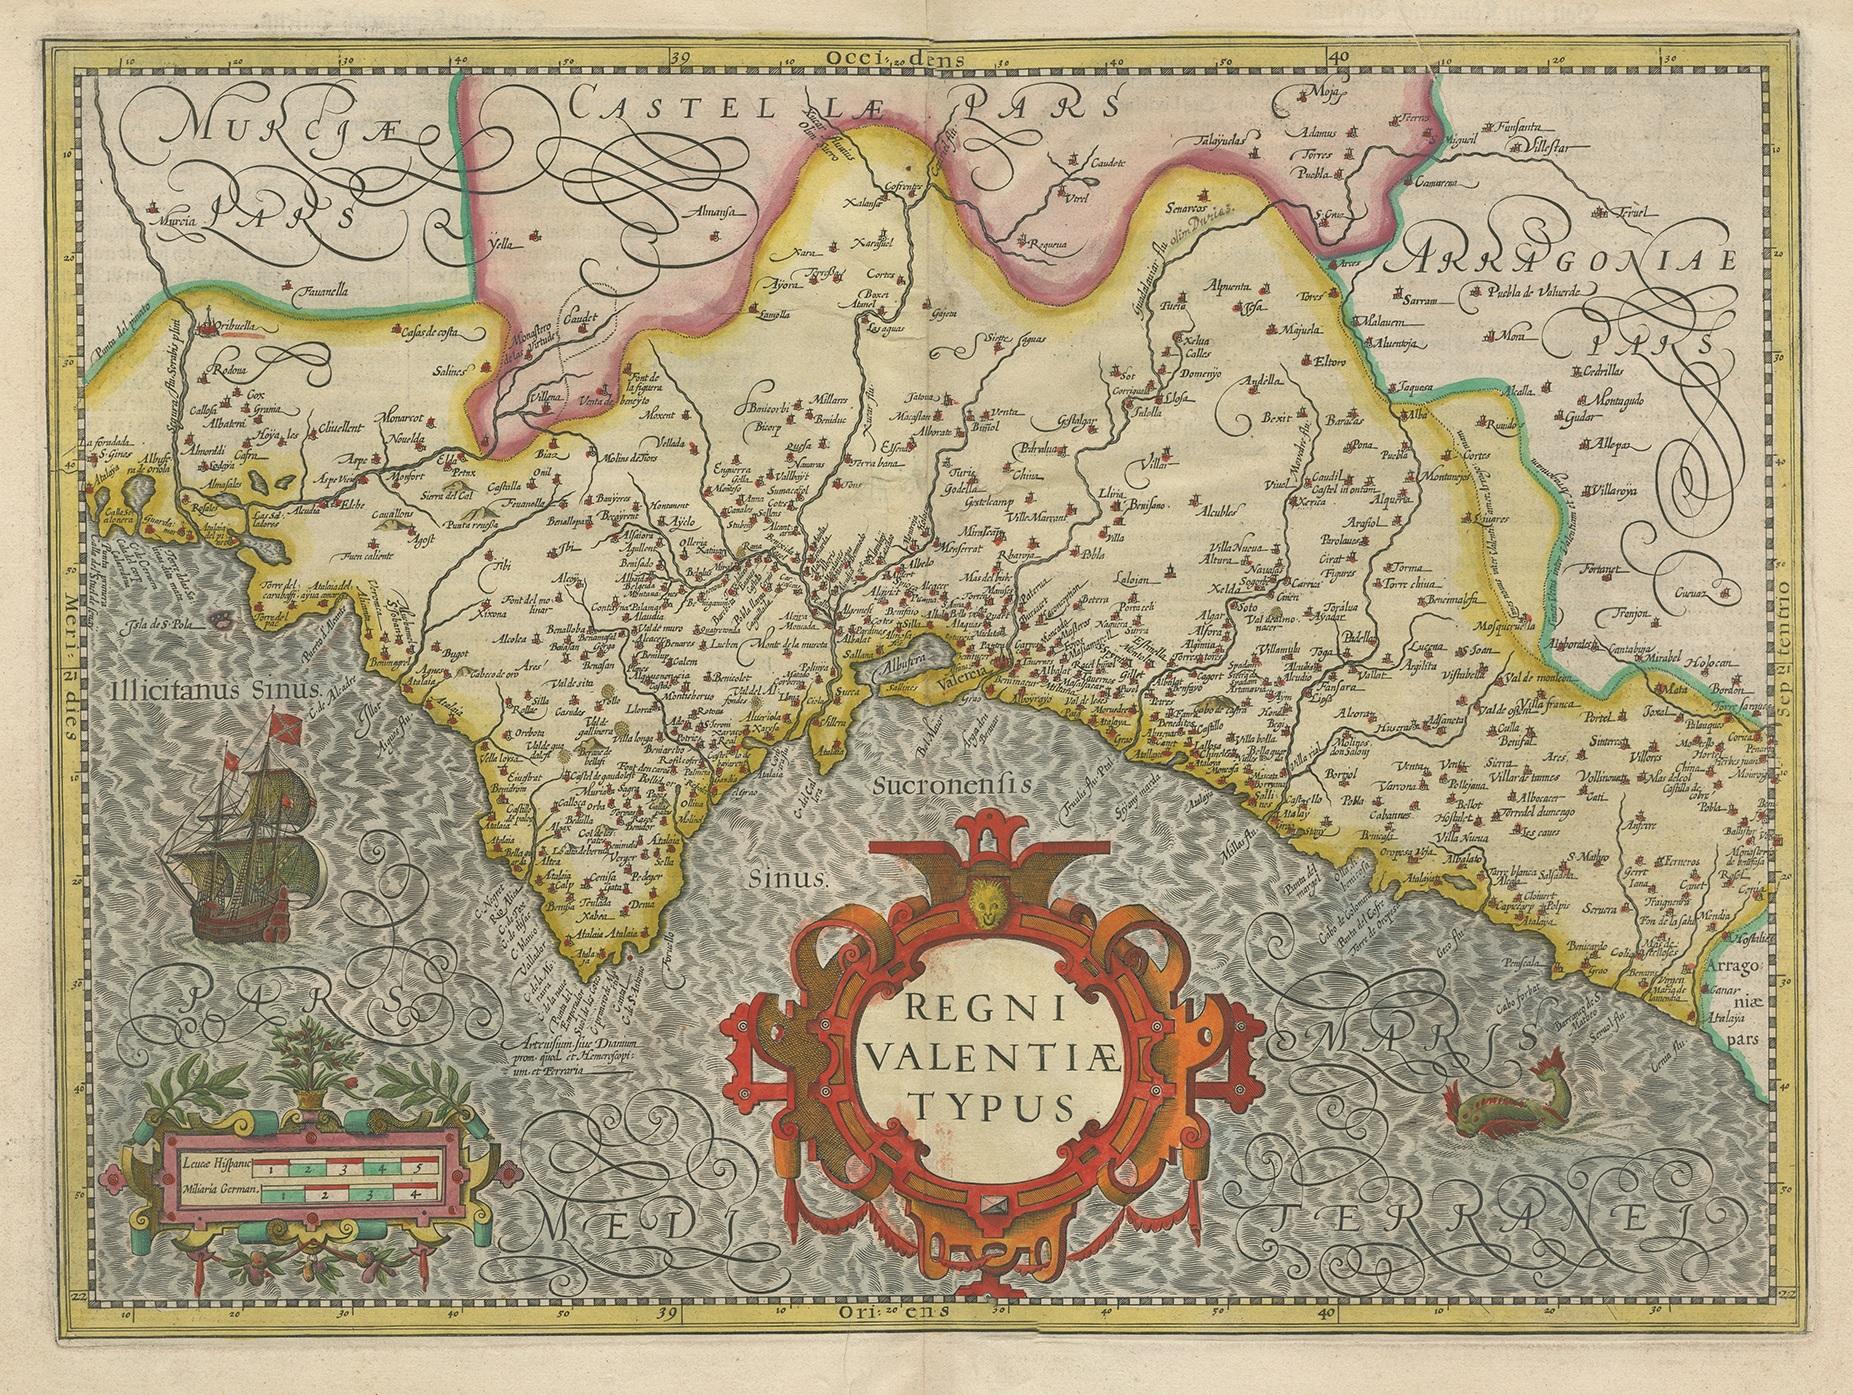 Antique map titled 'Regni Valentiae Typus'. Original antique map of Valencia, Spain. With two cartouches, a large ship and a seamonster. Published by Mercator/Hondius, 1633.